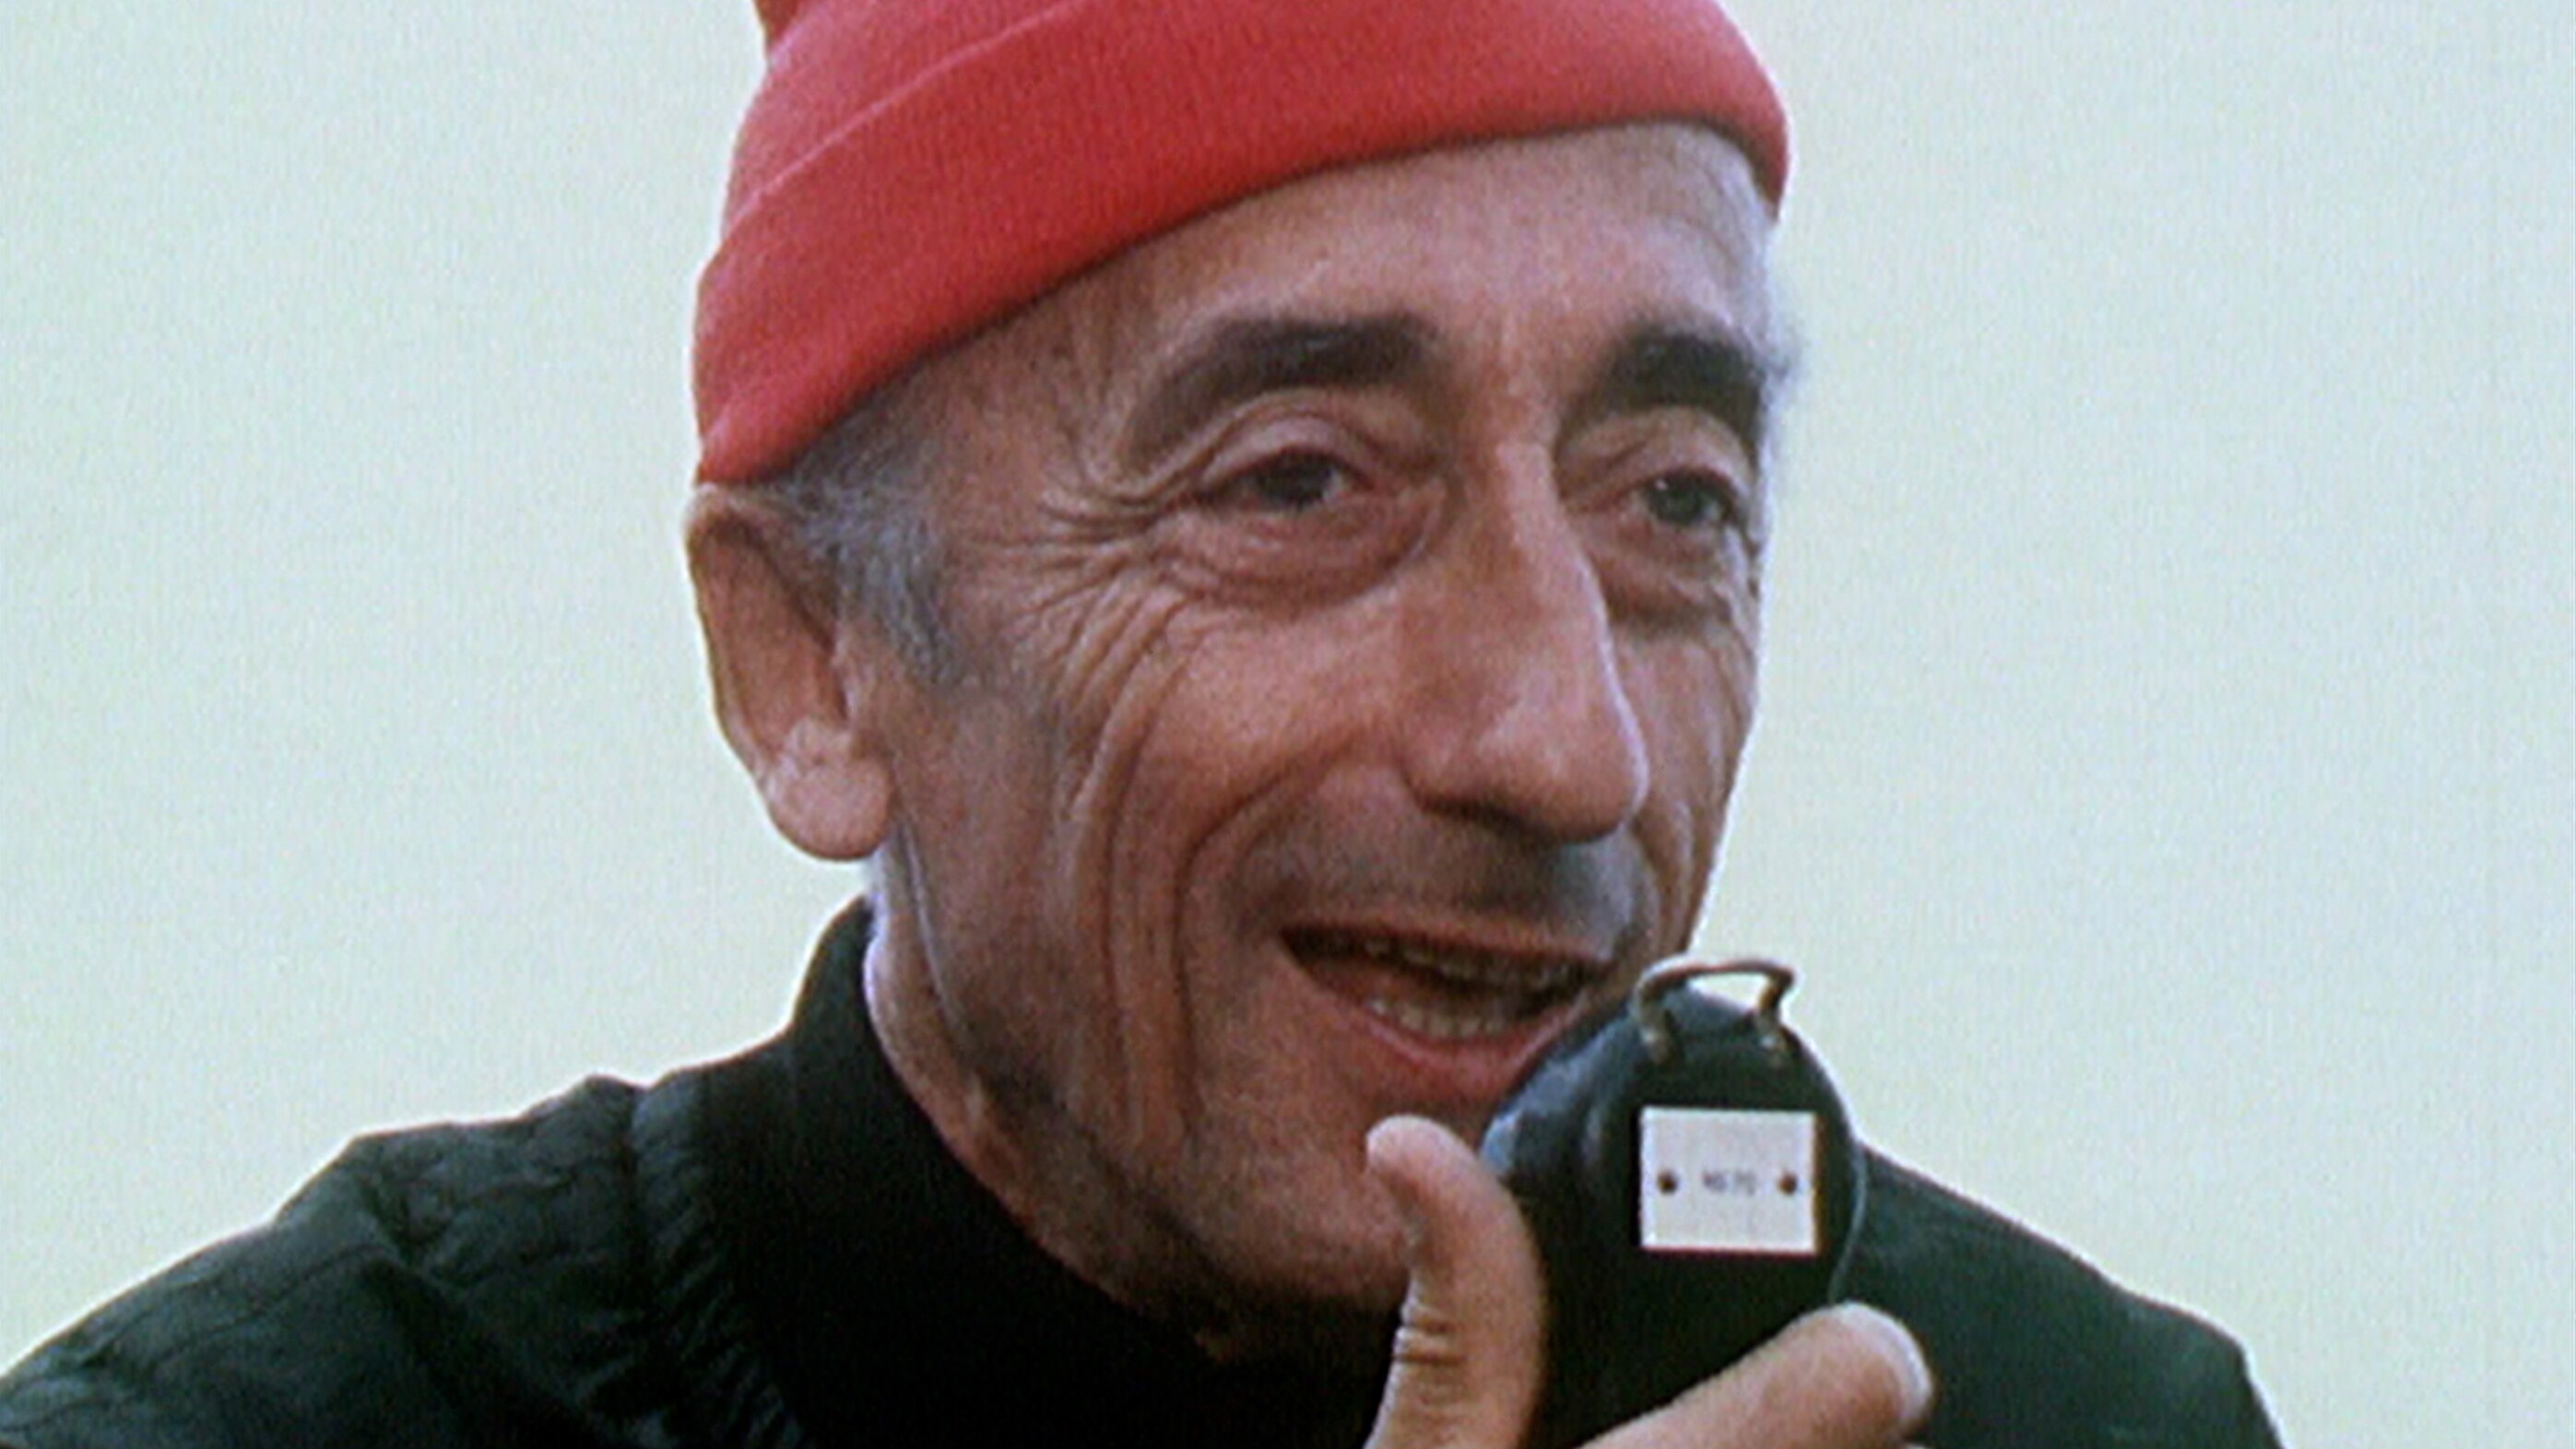 July 1969: Jacques Cousteau communicates by radio with a crew member exploring the ocean depths in one of the Calypso's diving saucers. (Credit: The Cousteau Society)